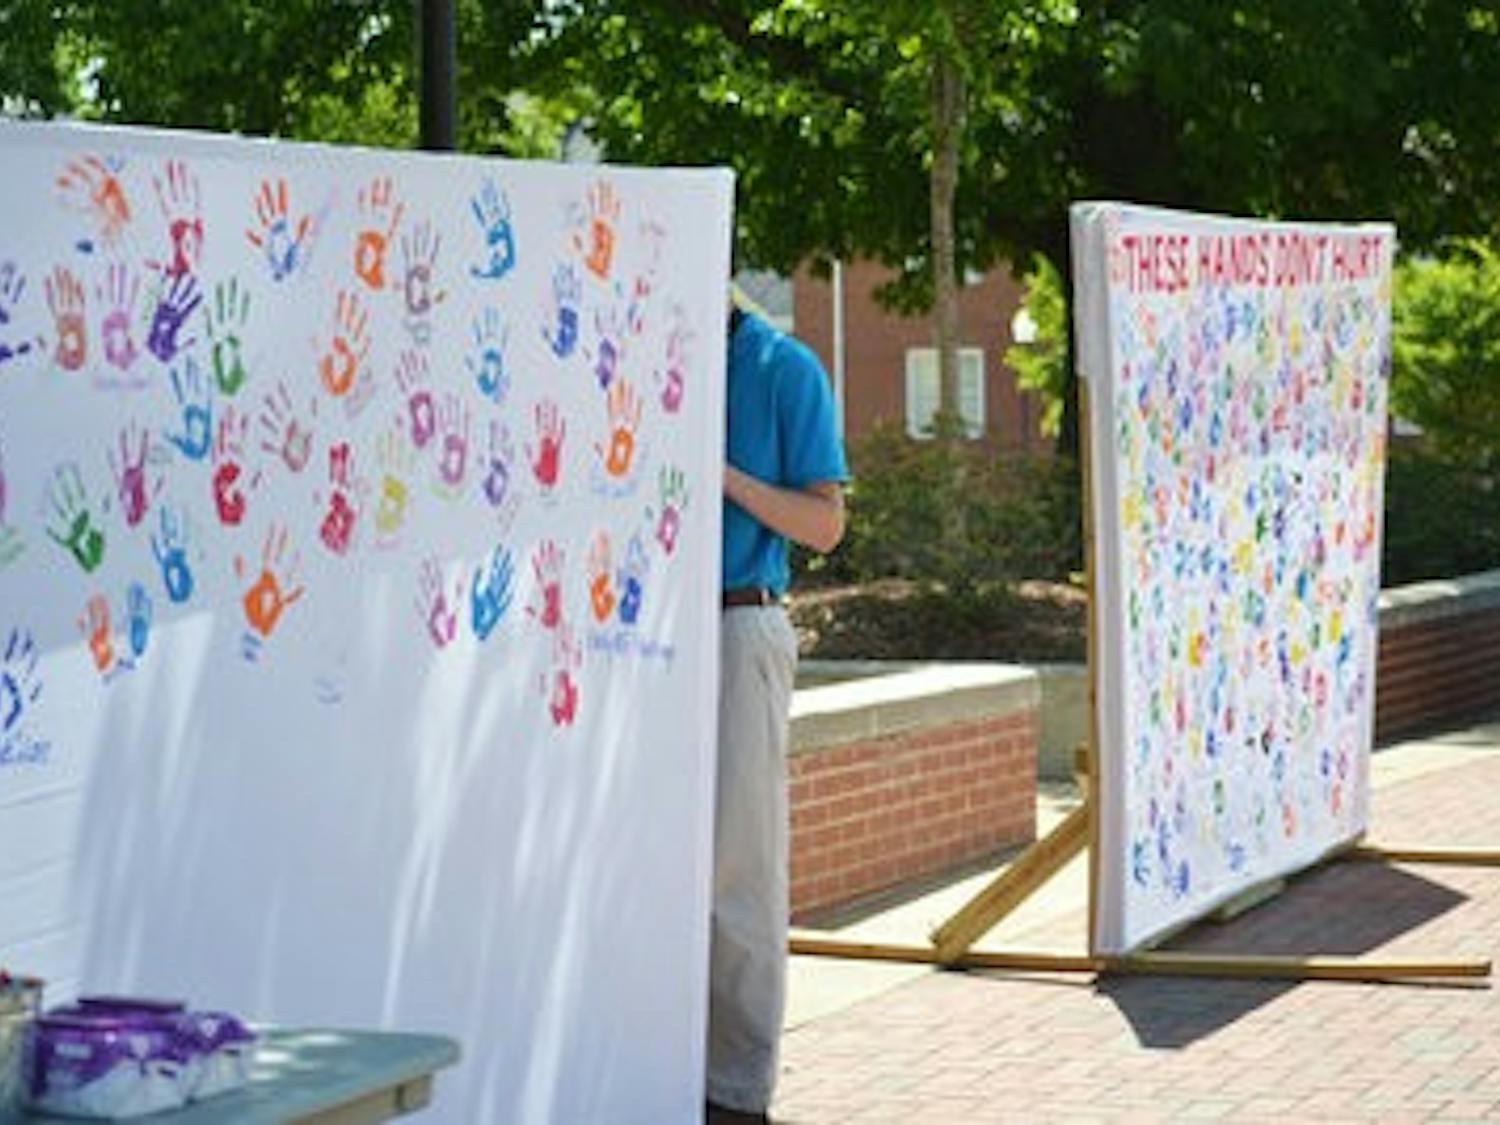 "These Hands Don't Hurt" is a campaign promoting Sexual Assault Awareness Month that took place on the Concourse this week. (Danielle Lowe / ASSISTANT PHOTO EDITOR)